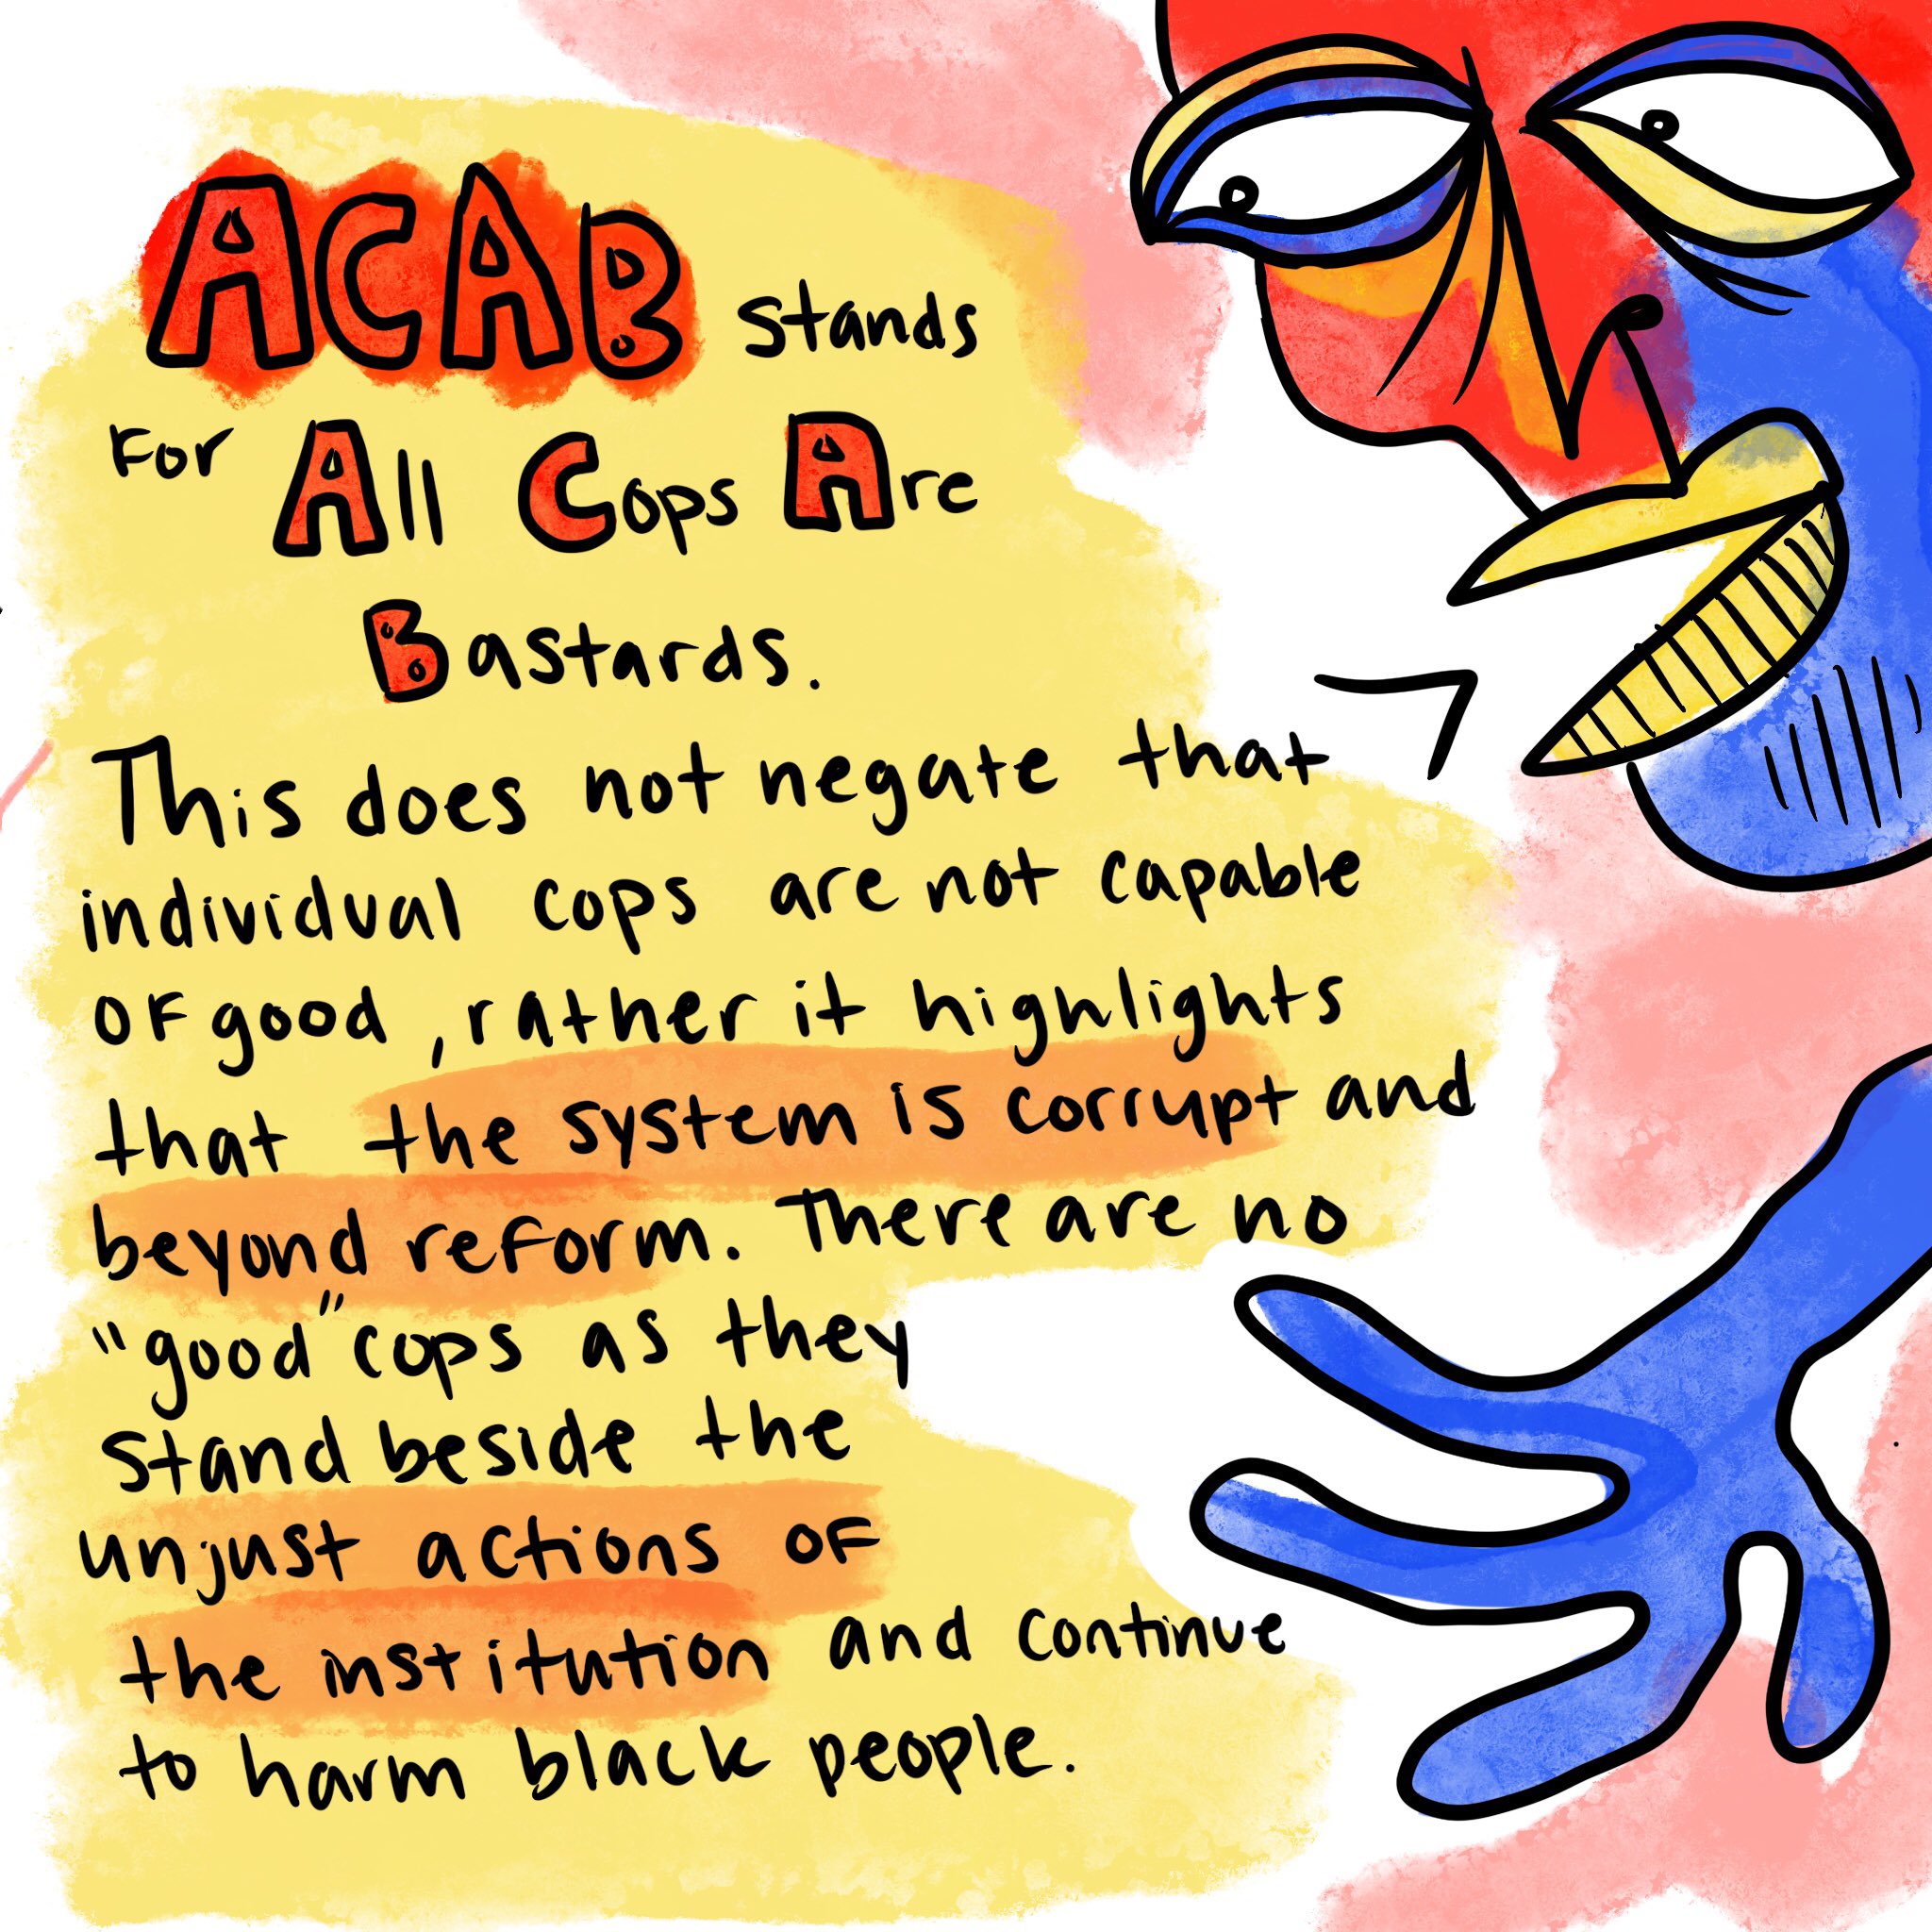 art by @furbyrose on twitter and @mrosearts on instagram. head1 saying 'ACAB stans for All Cops Are Bastards. This does not negate that individual cops are not capable of good, rather it highlights that the system is corrupt and beyond reform. There are no "good" cops as tehy stand beside the unjust actions of the institution adn continue to harm black people.'